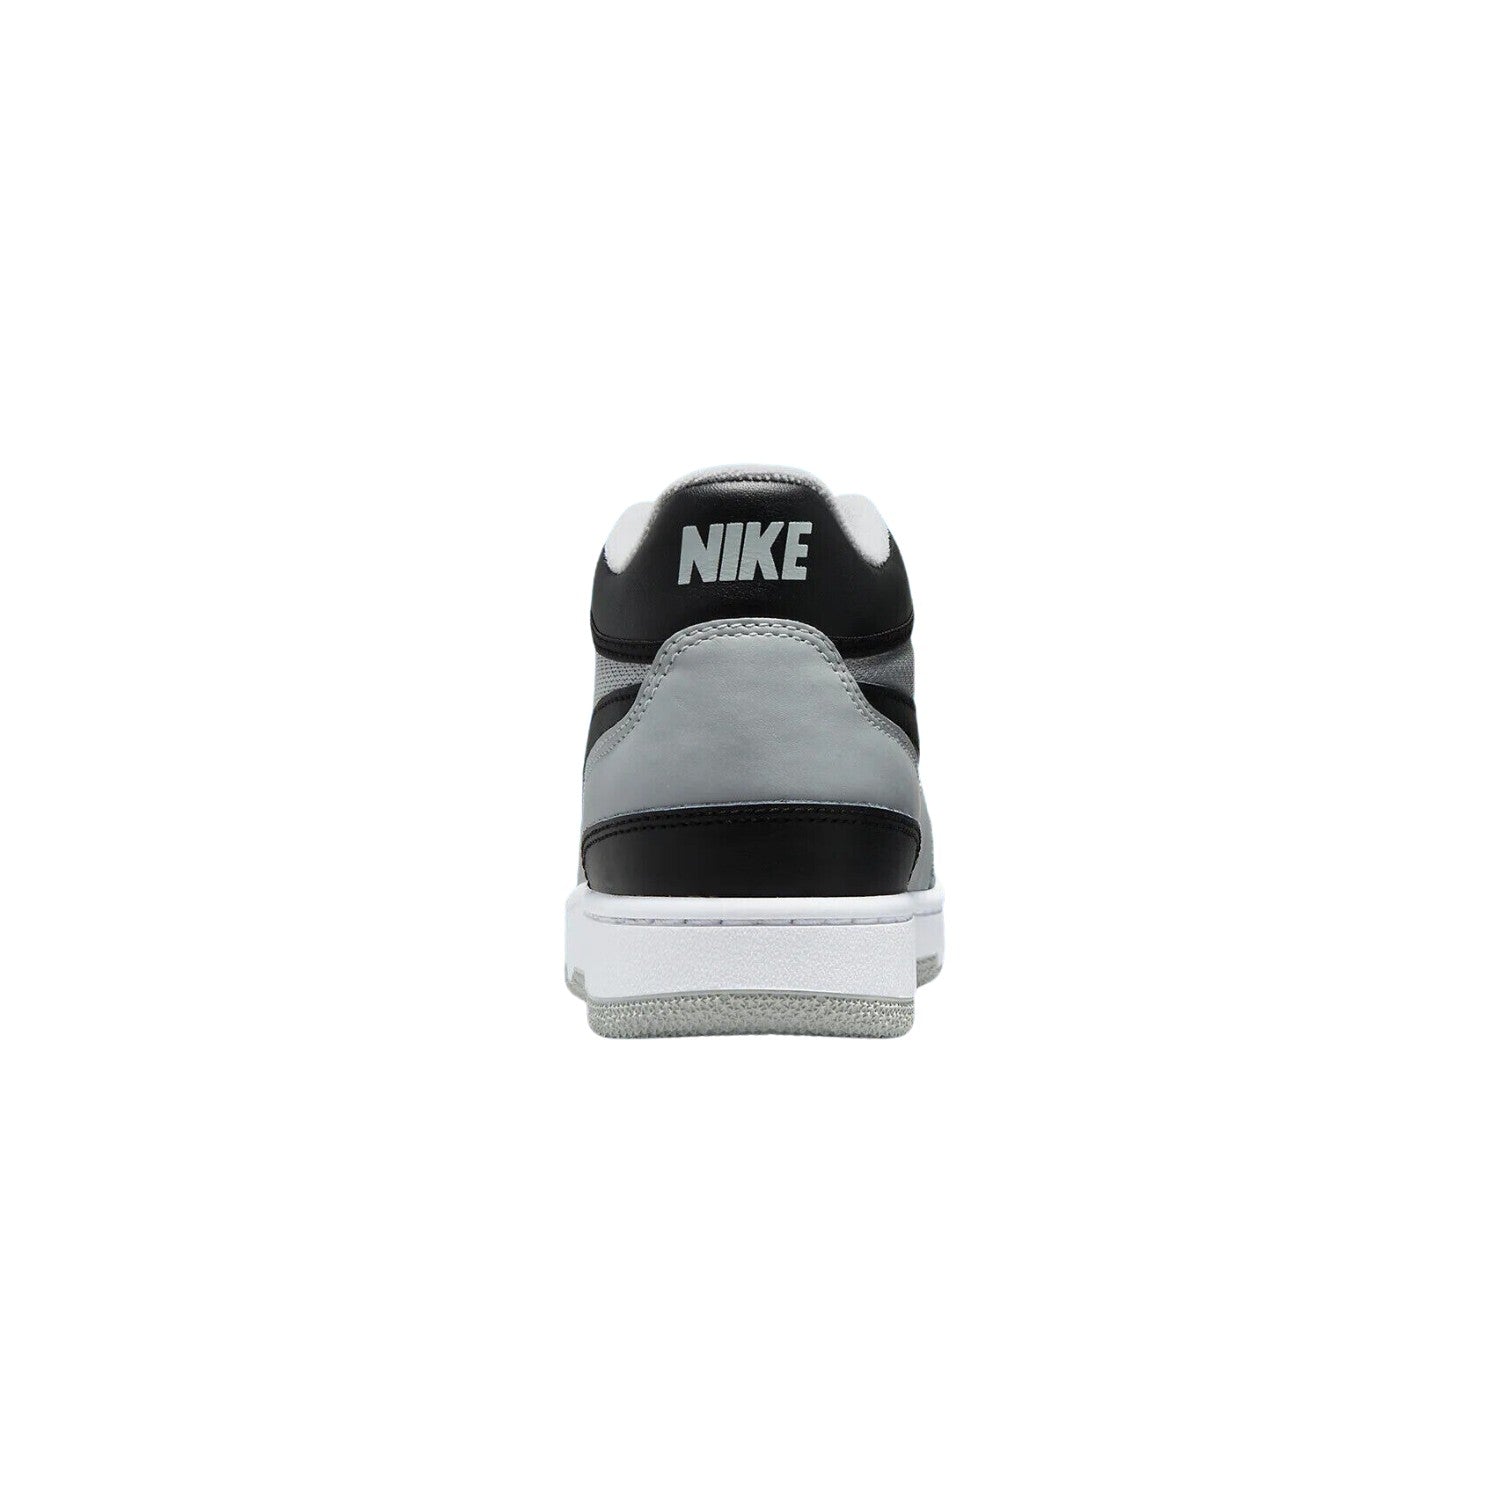 Nike Attack Qs Sp Mens Style : Fb8938